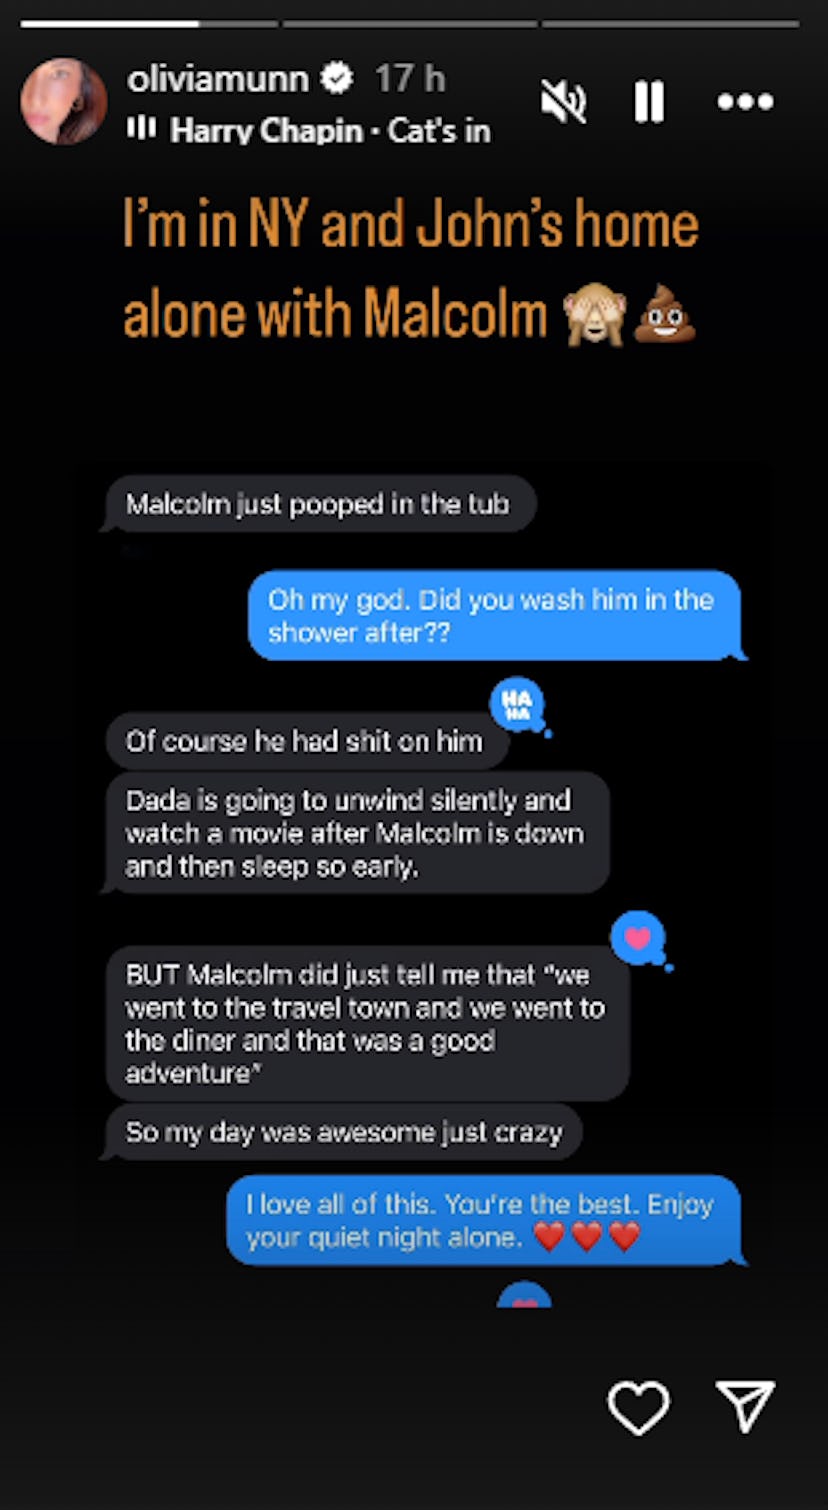 John Mulaney had to deal with Malcolm pooping in the tub.